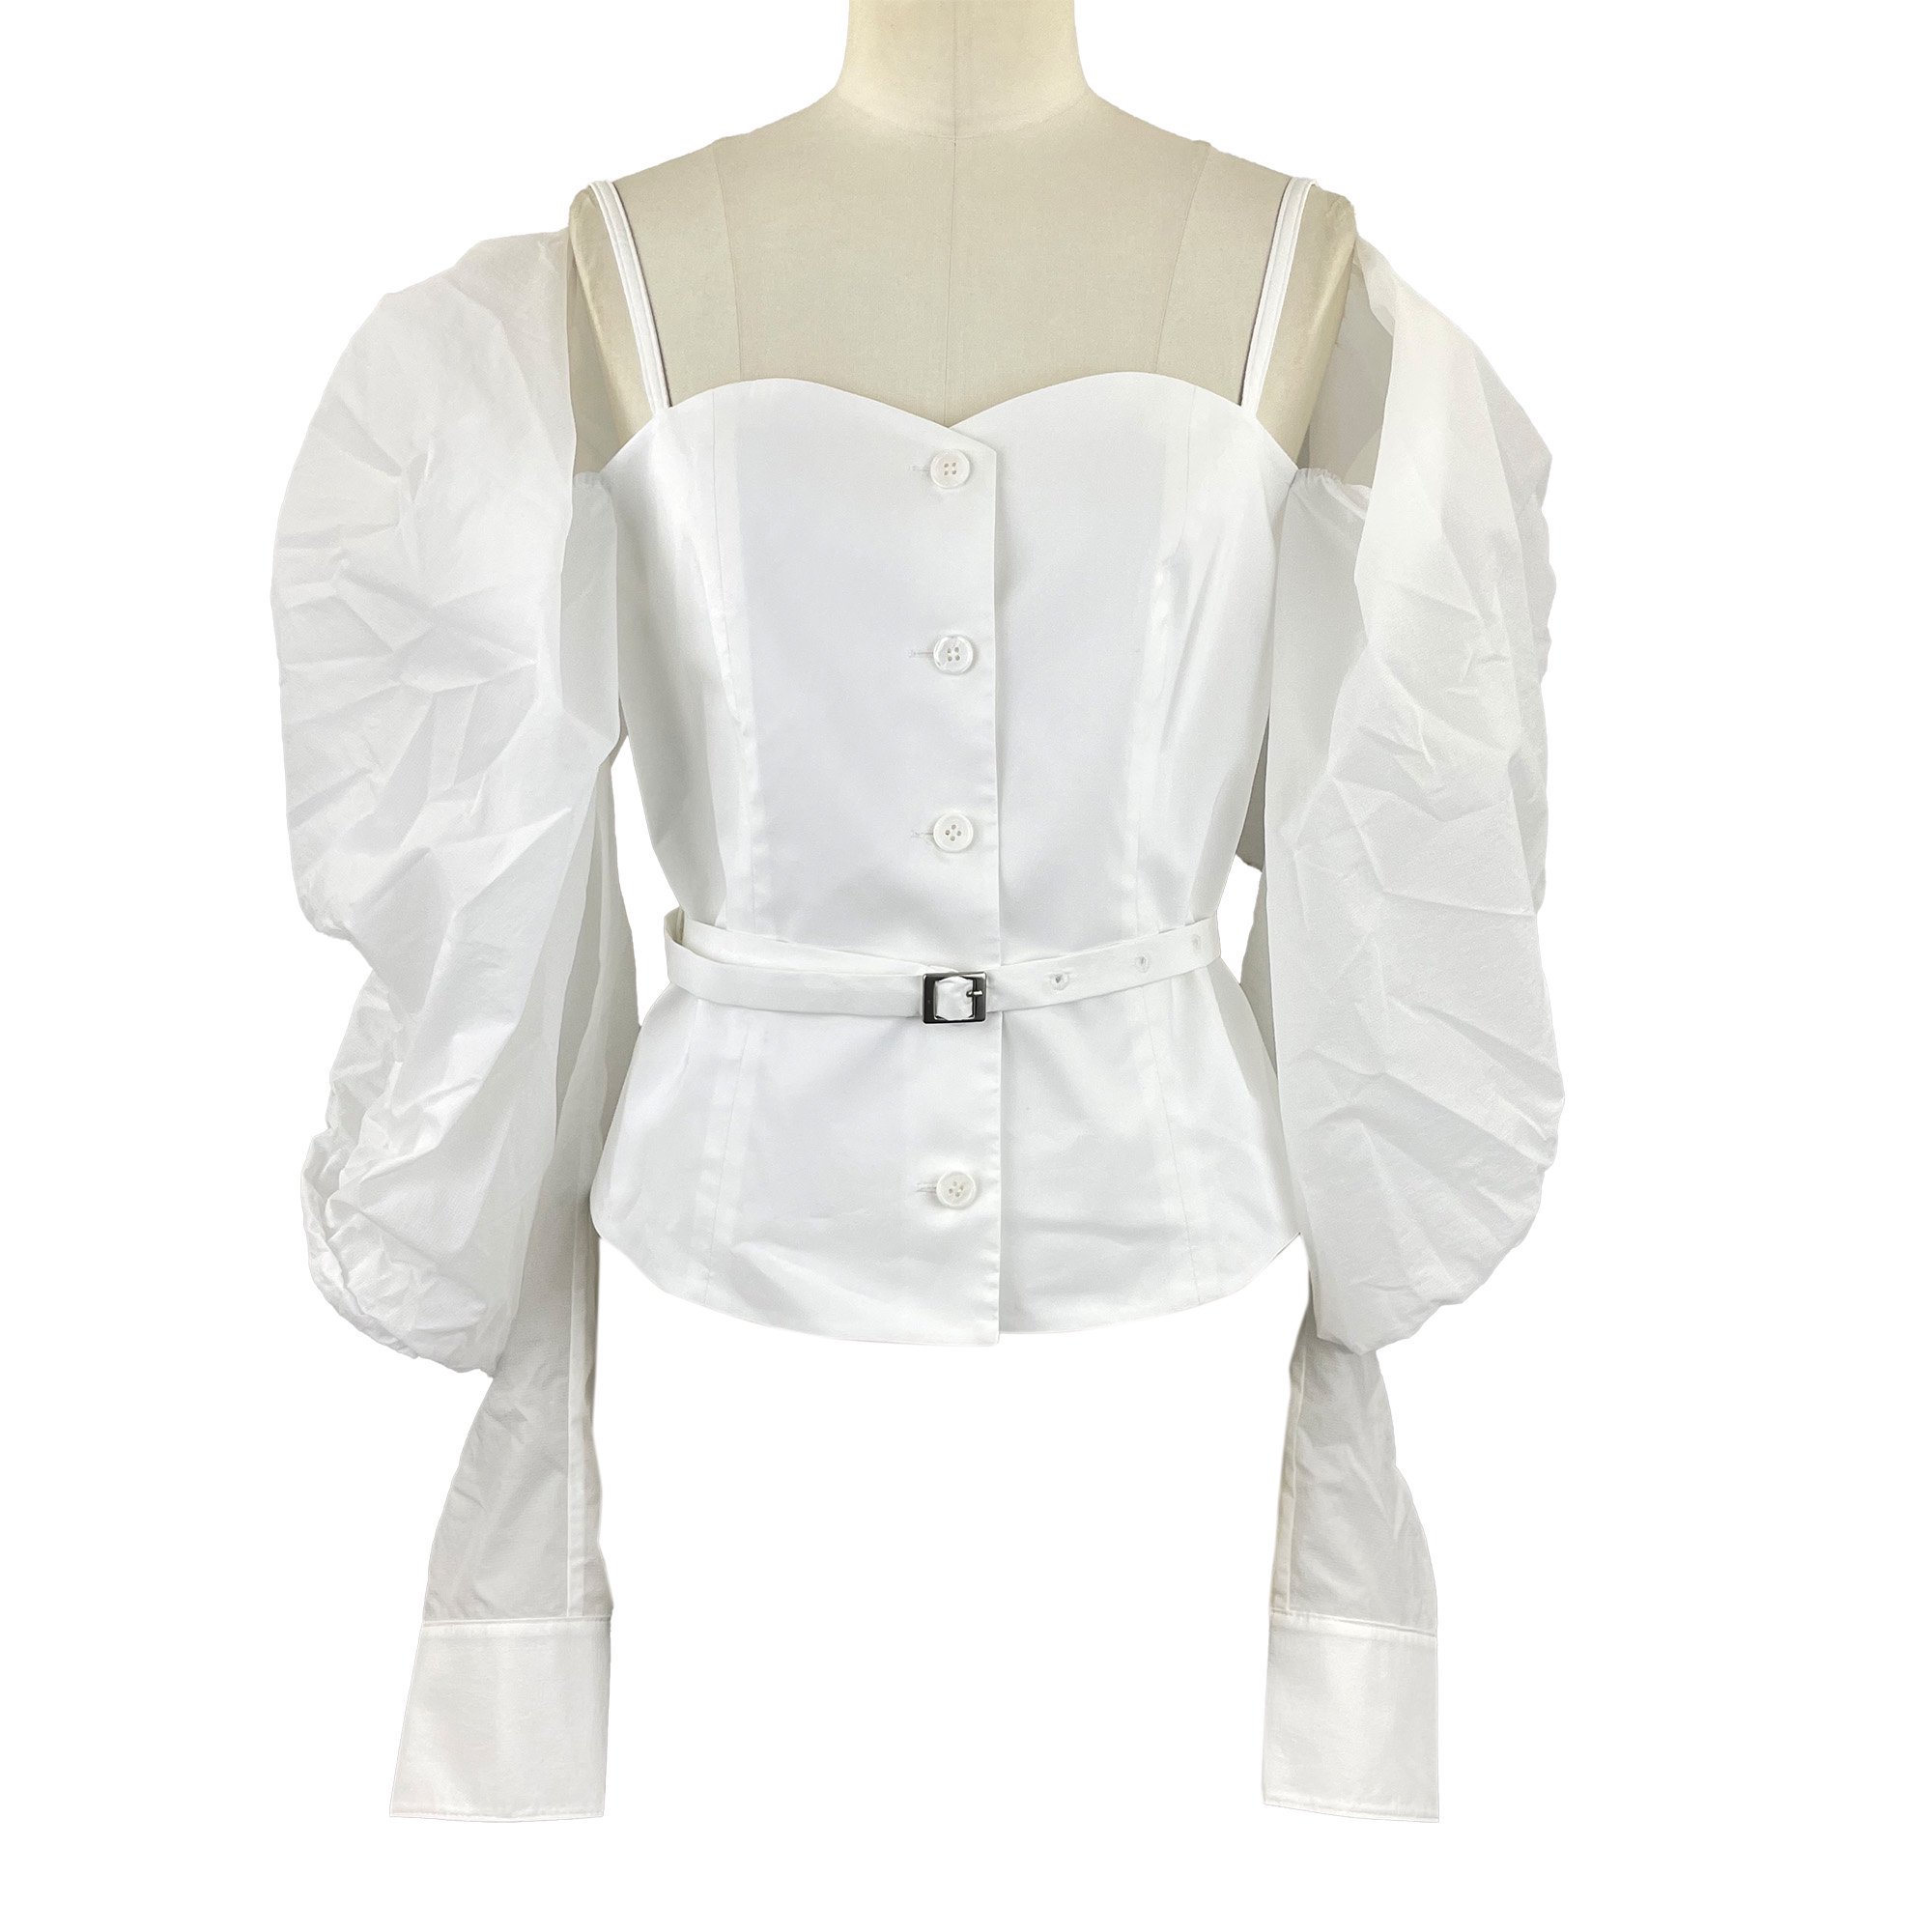 <img class='new_mark_img1' src='https://img.shop-pro.jp/img/new/icons7.gif' style='border:none;display:inline;margin:0px;padding:0px;width:auto;' />BESFXXK / WIND SLEEVE OPEN SHOULDER BLOUSE / WHITE